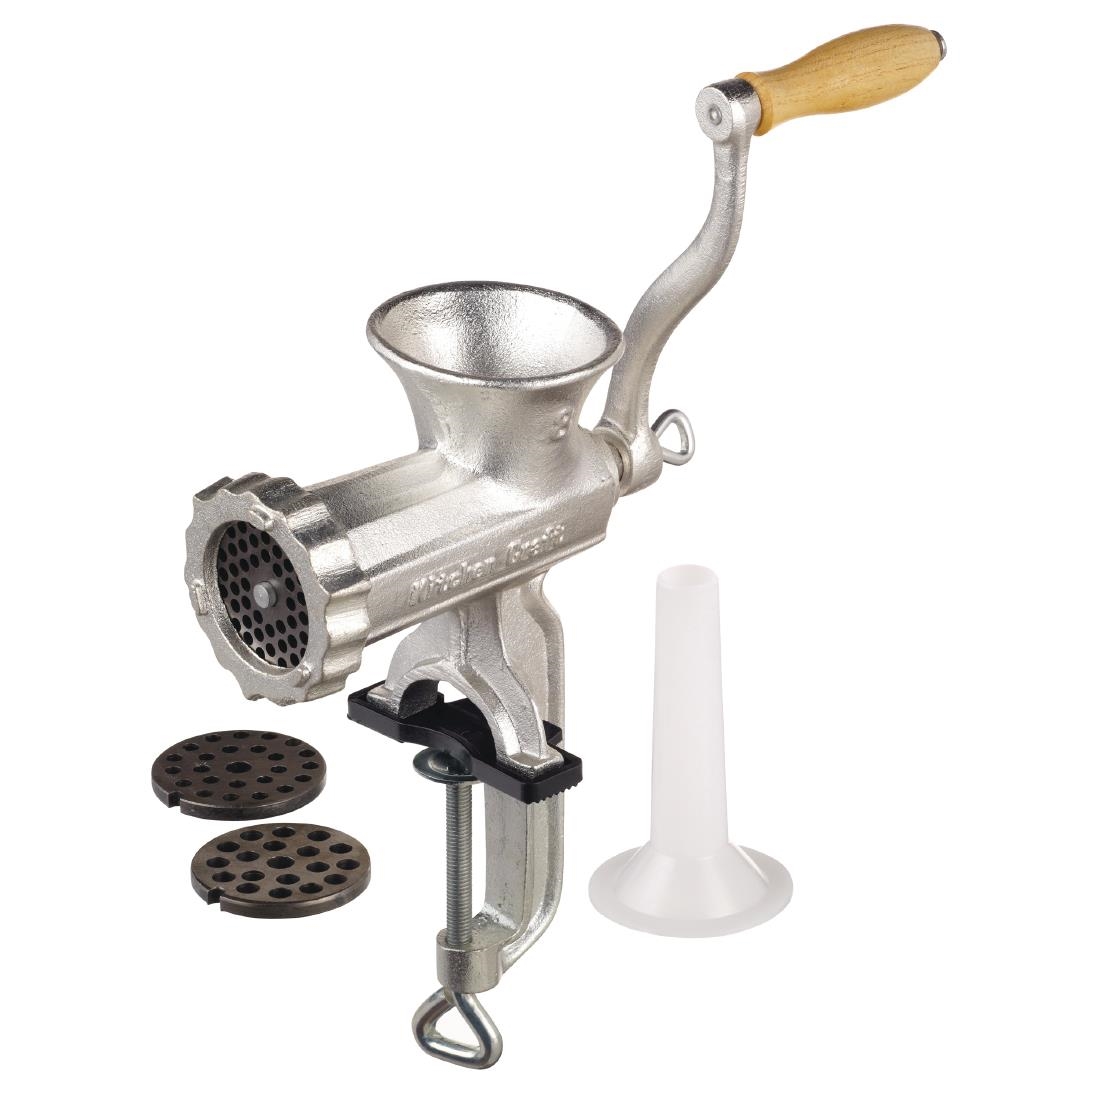 Kitchen Craft No.8 Manual Meat Mincer